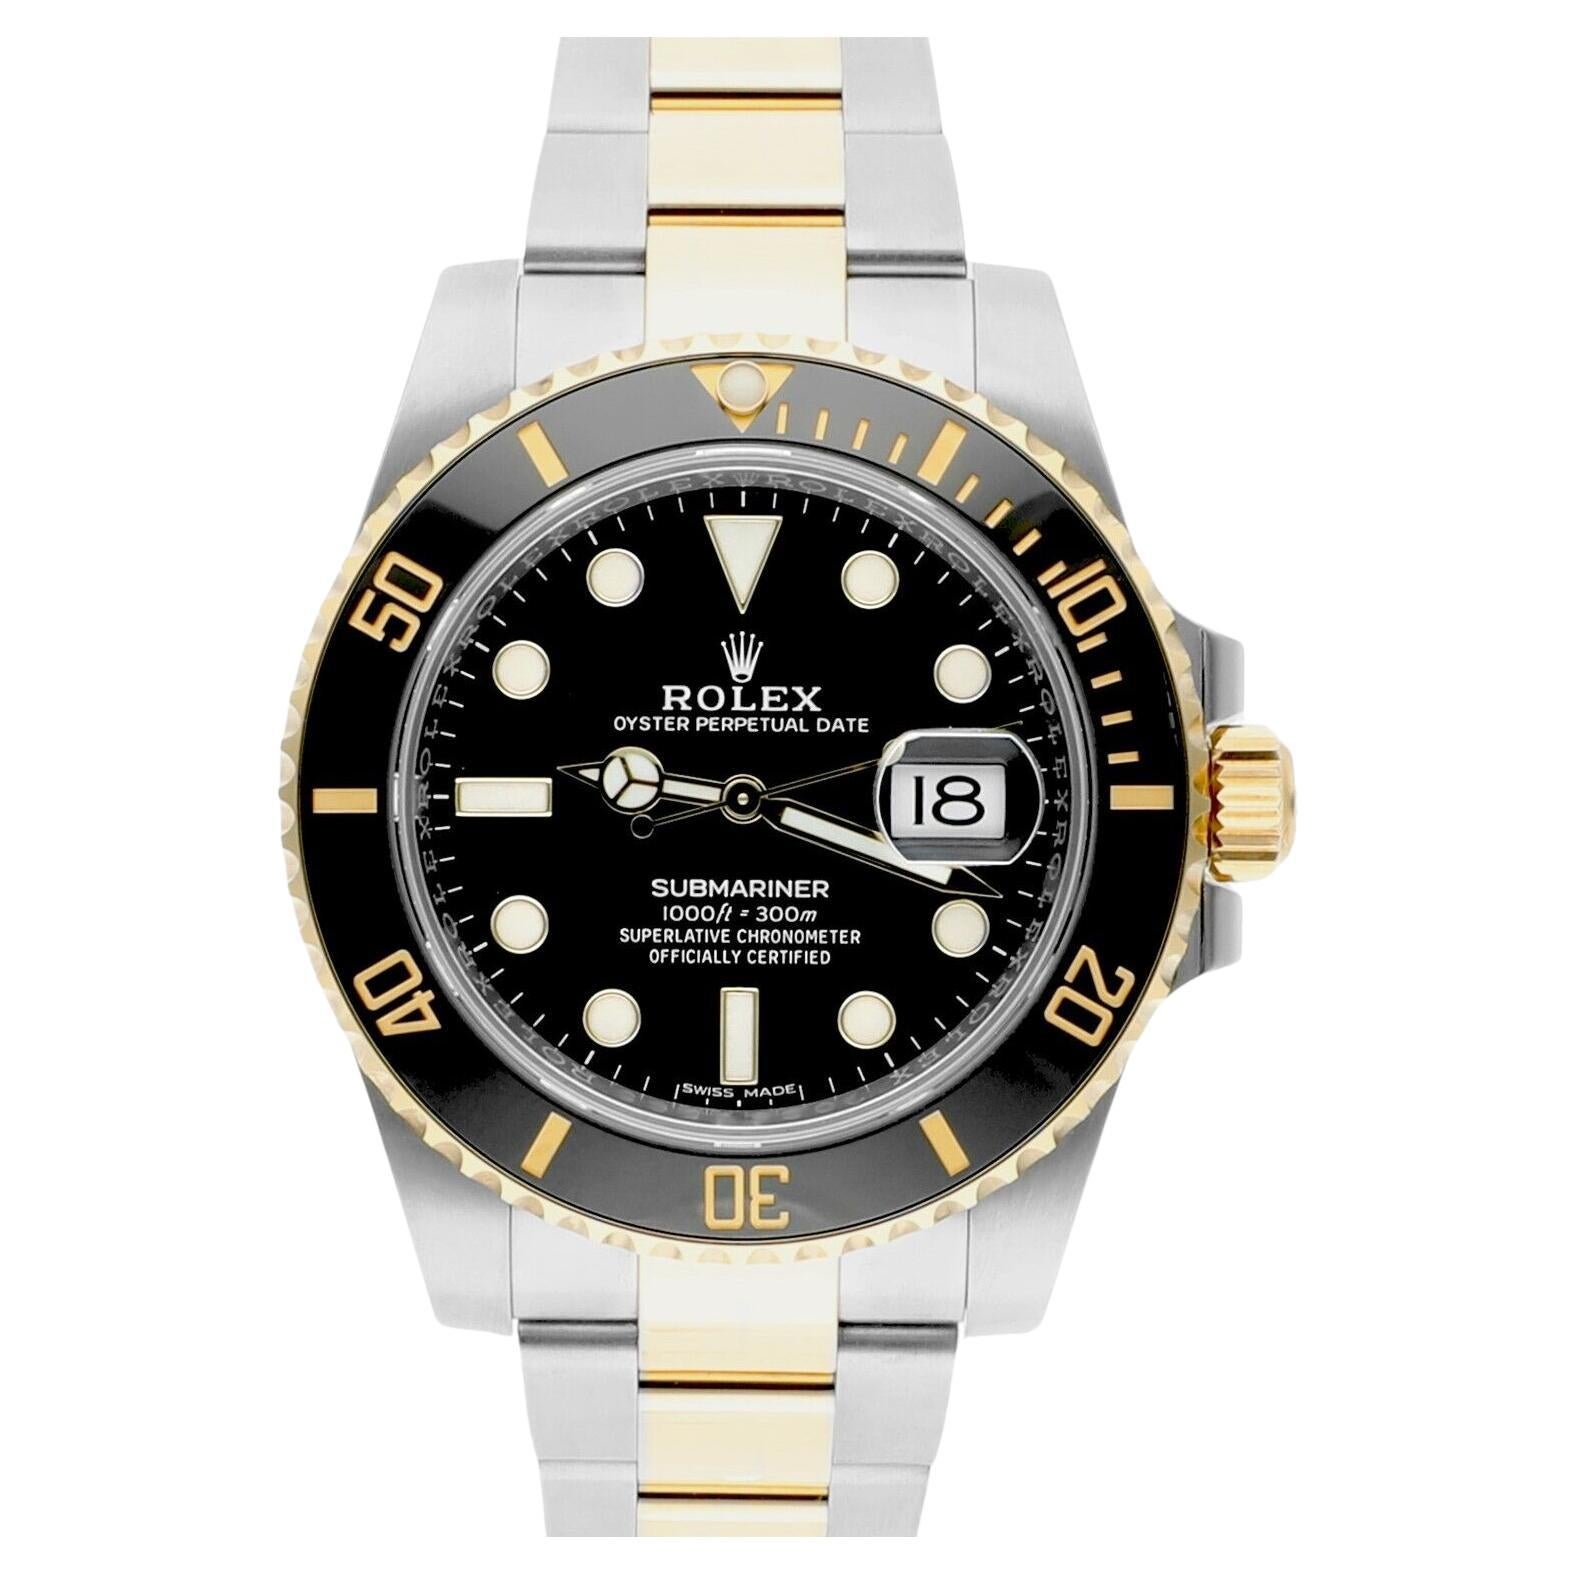 Rolex Submariner Date 116613LN Black Dial 18k Gold/Steel Ceramic Complete Watch For Sale